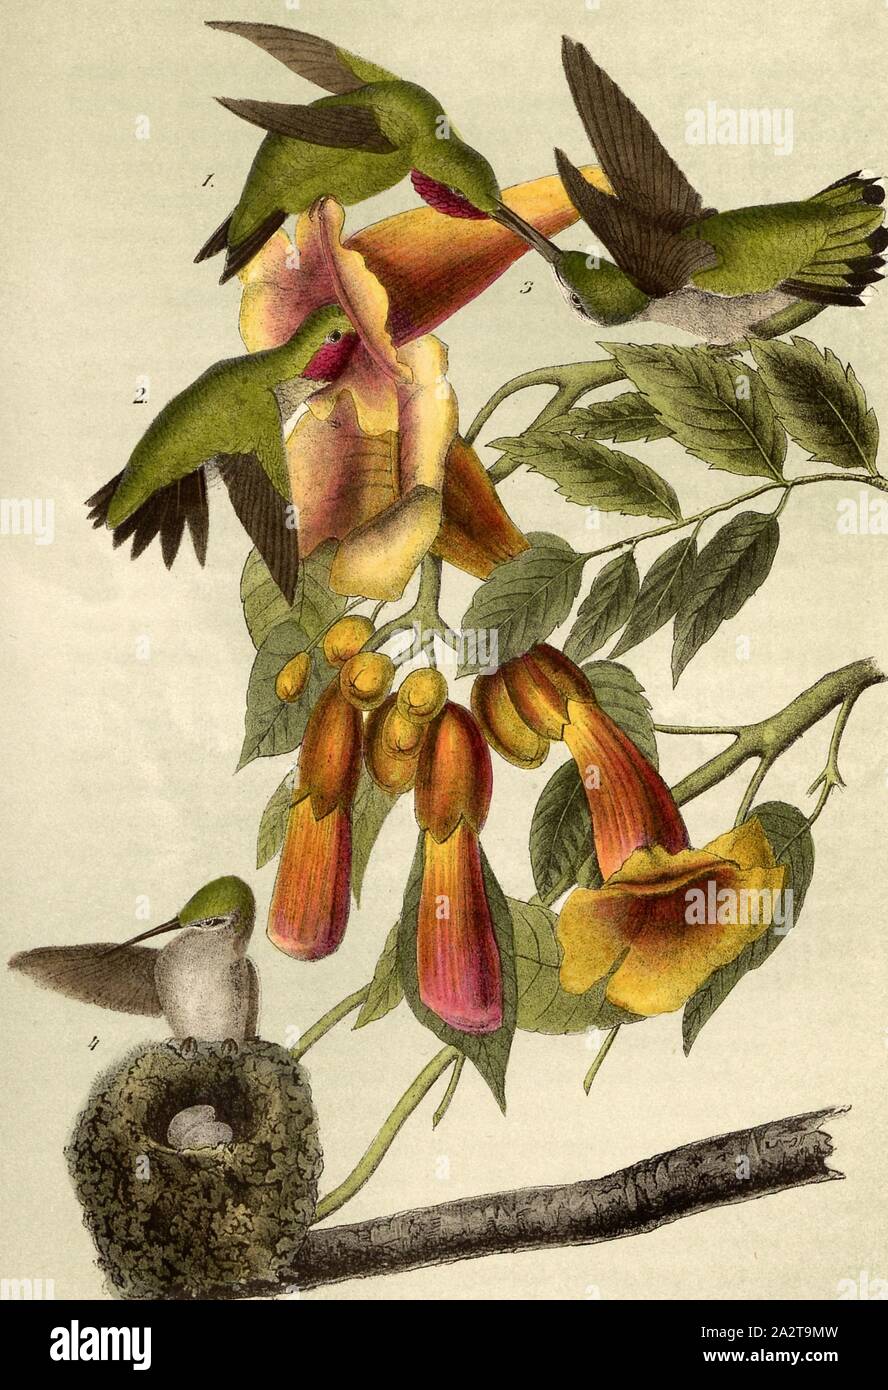 Ruby throated Hummingbird - Bignonia-radicans, Ruby-throated Hummingbird (Archilochus colubris), American Climbing Trumpet (Campsis radicans), Signed: J.J. Audubon, J.T. Bowen, lithograph, Pl. 253 (vol. 4), Audubon, John James (drawn); Bowen, J. T. (lith.), 1856, John James Audubon: The birds of America: from drawings made in the United States and their territories. New York: Audubon, 1856 Stock Photo